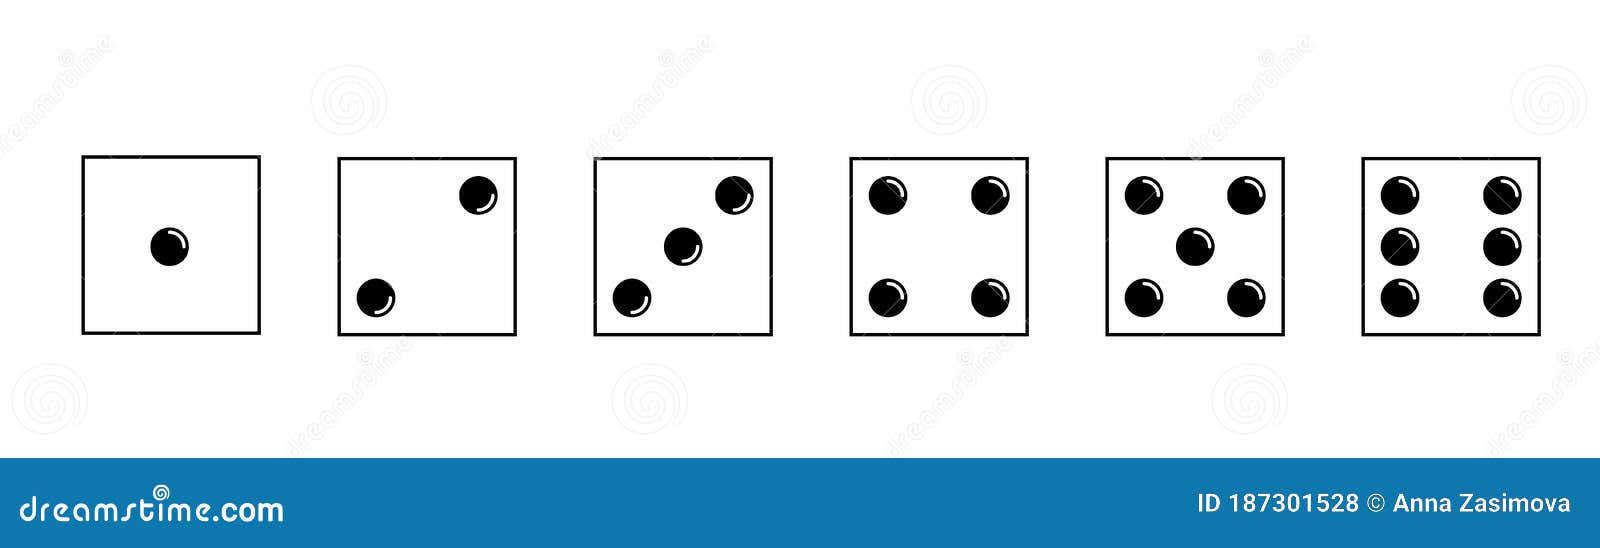 No dots/numbers Individual Dice 6 Sided Dice with Alternative Icon to Count 